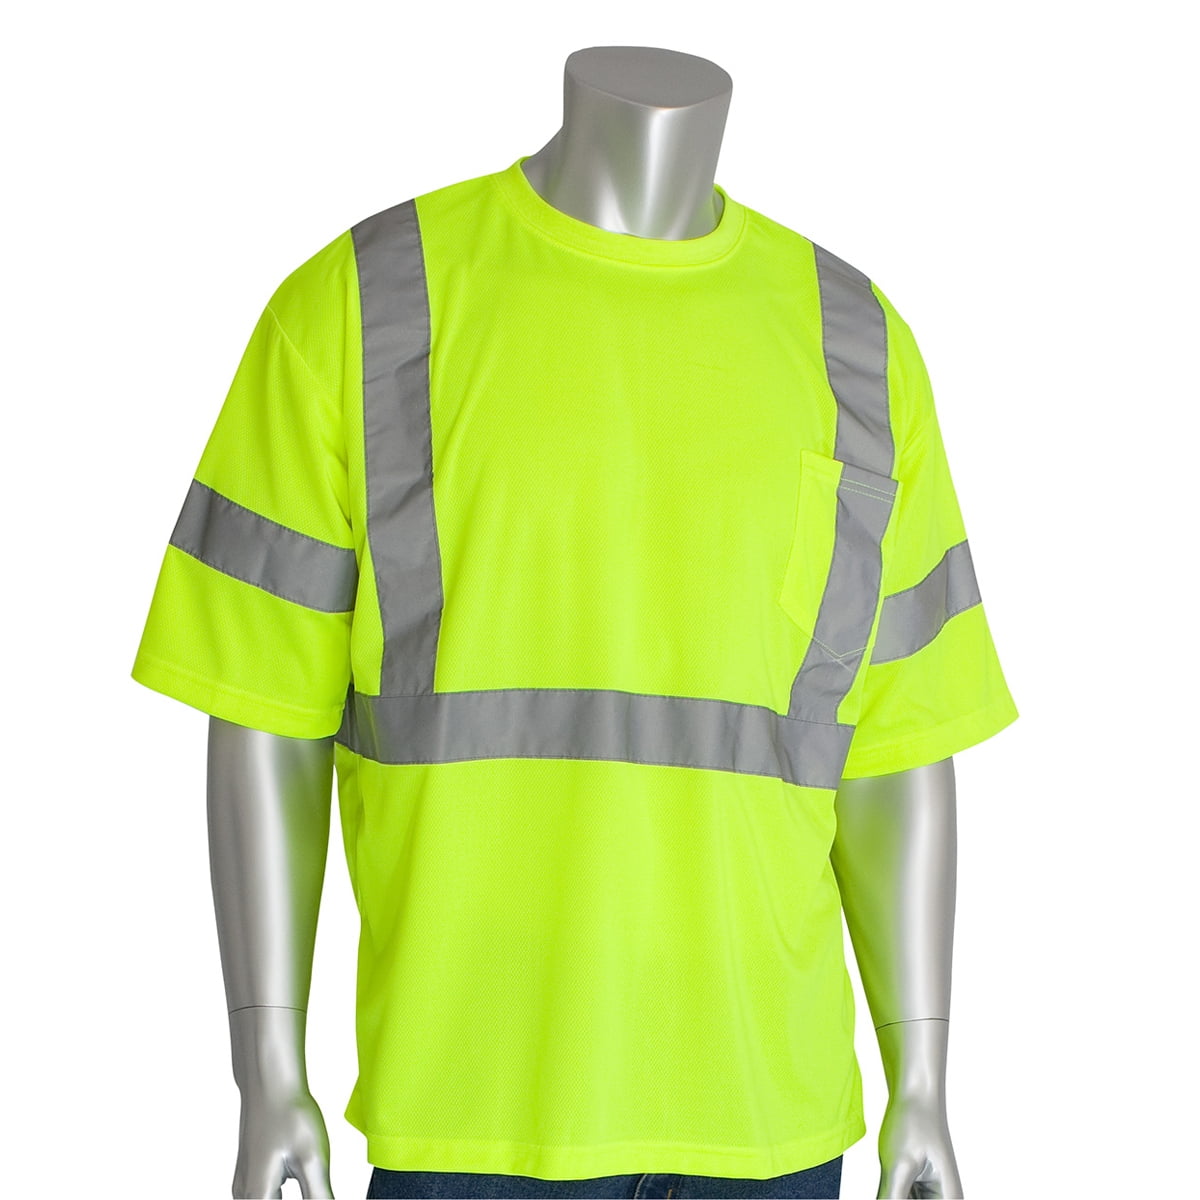 PIP Safety Vests - Yellow/Lime - X-Back - 313-1400-LY/XL - Walmart.com